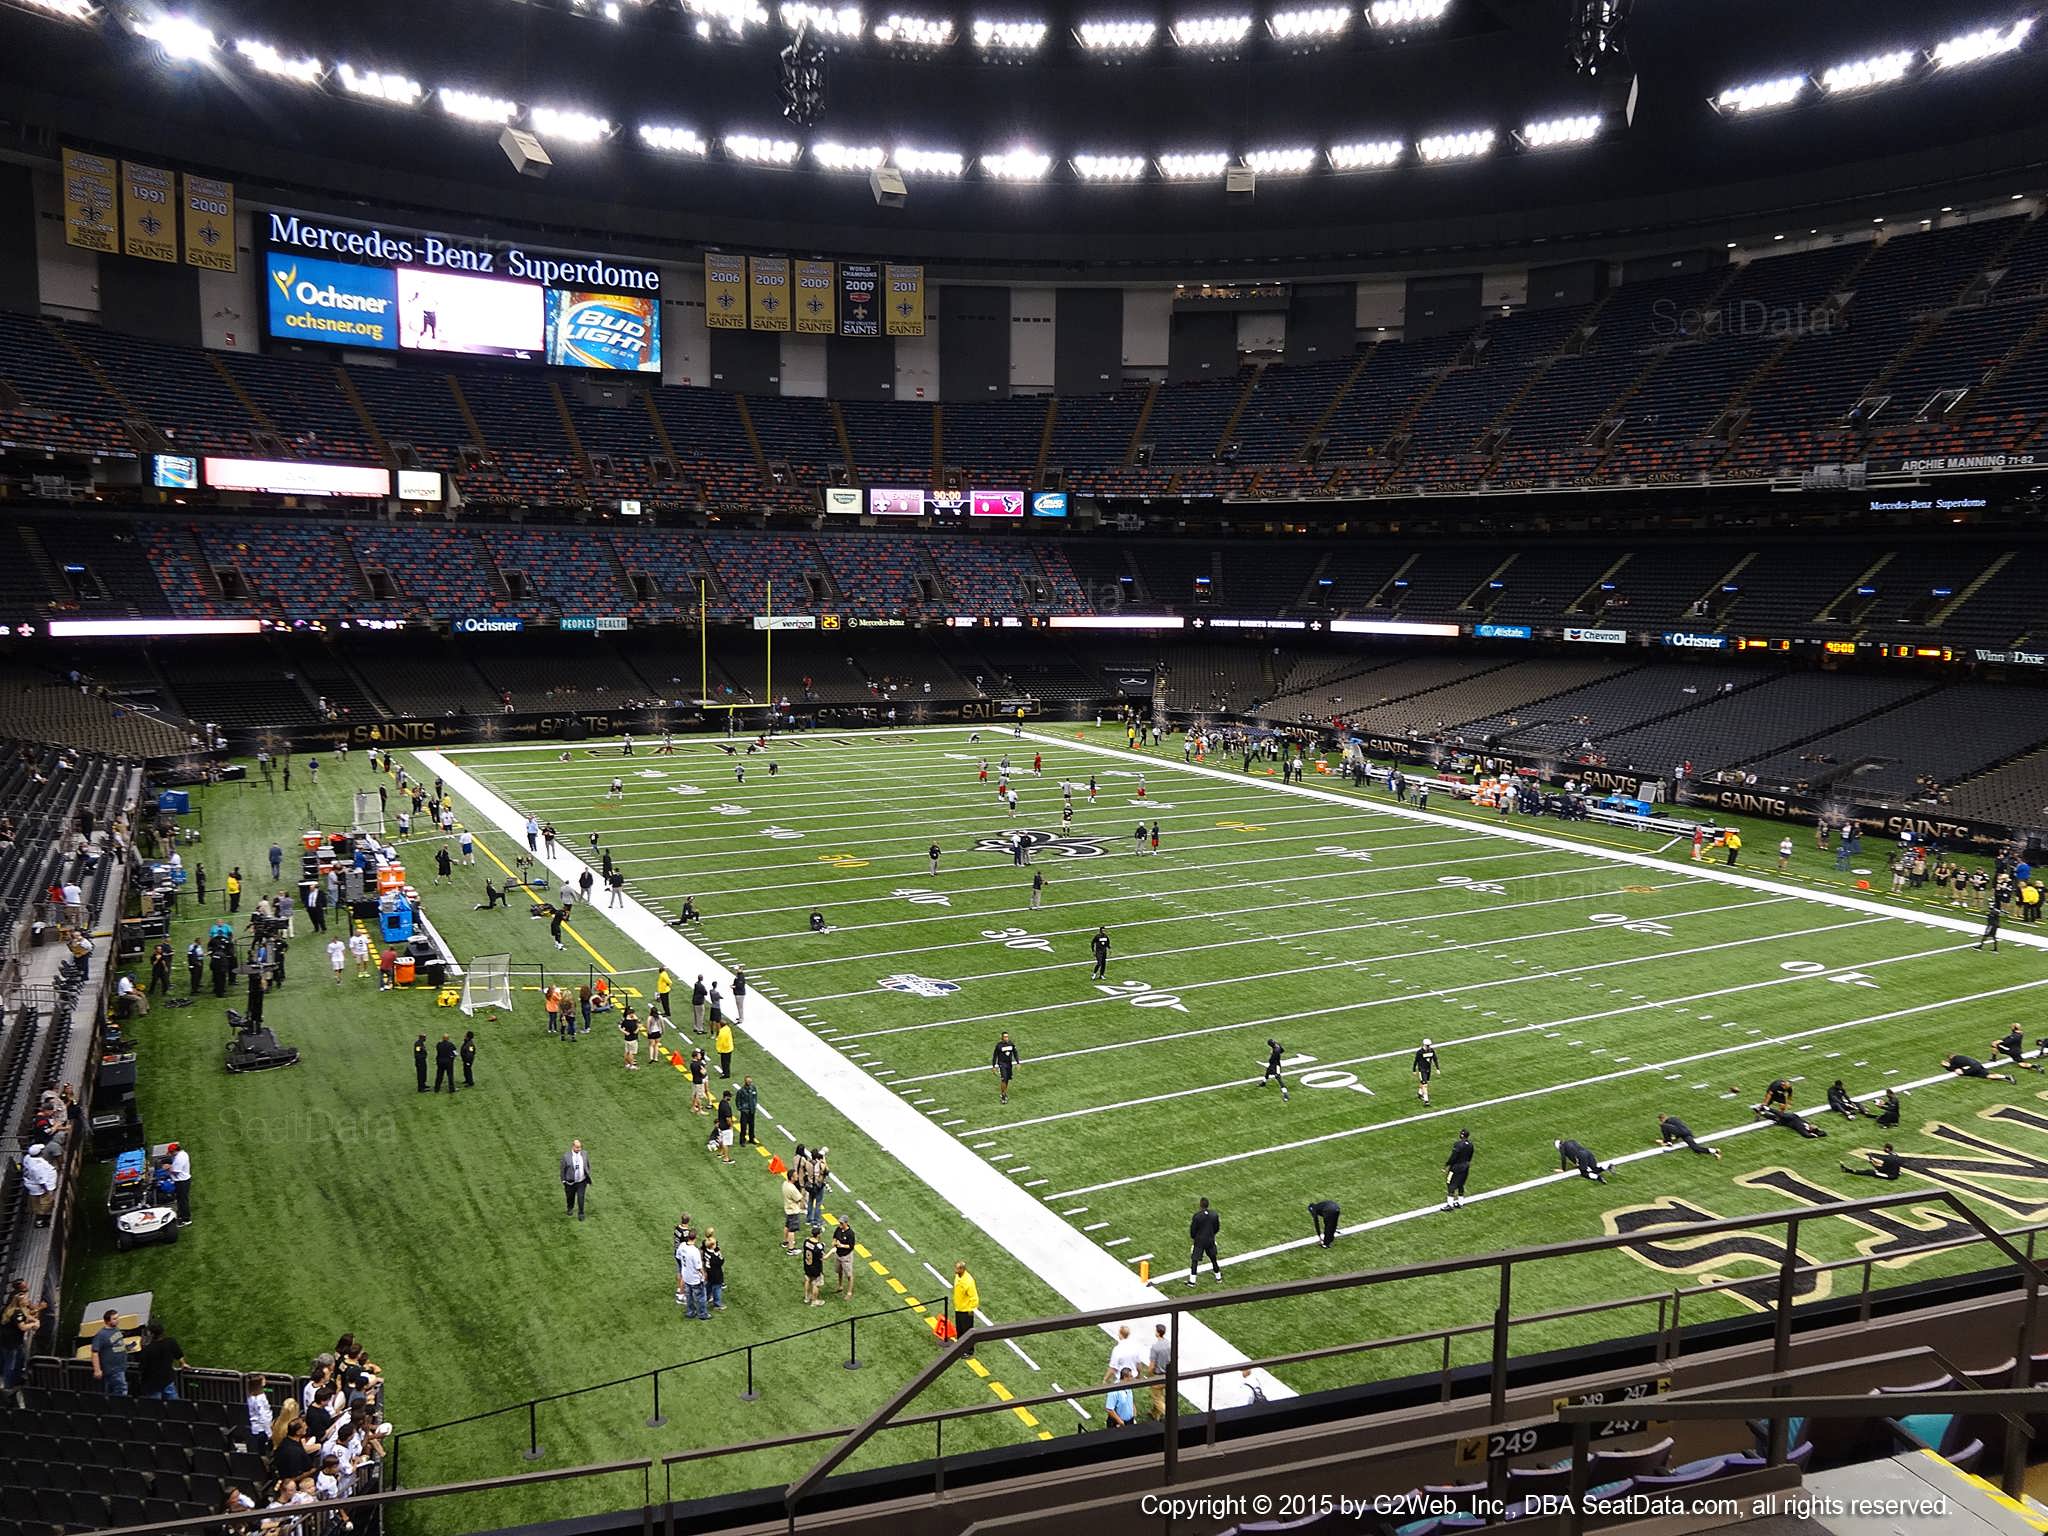 Seat view from section 328 at the Mercedes-Benz Superdome, home of the New Orleans Saints